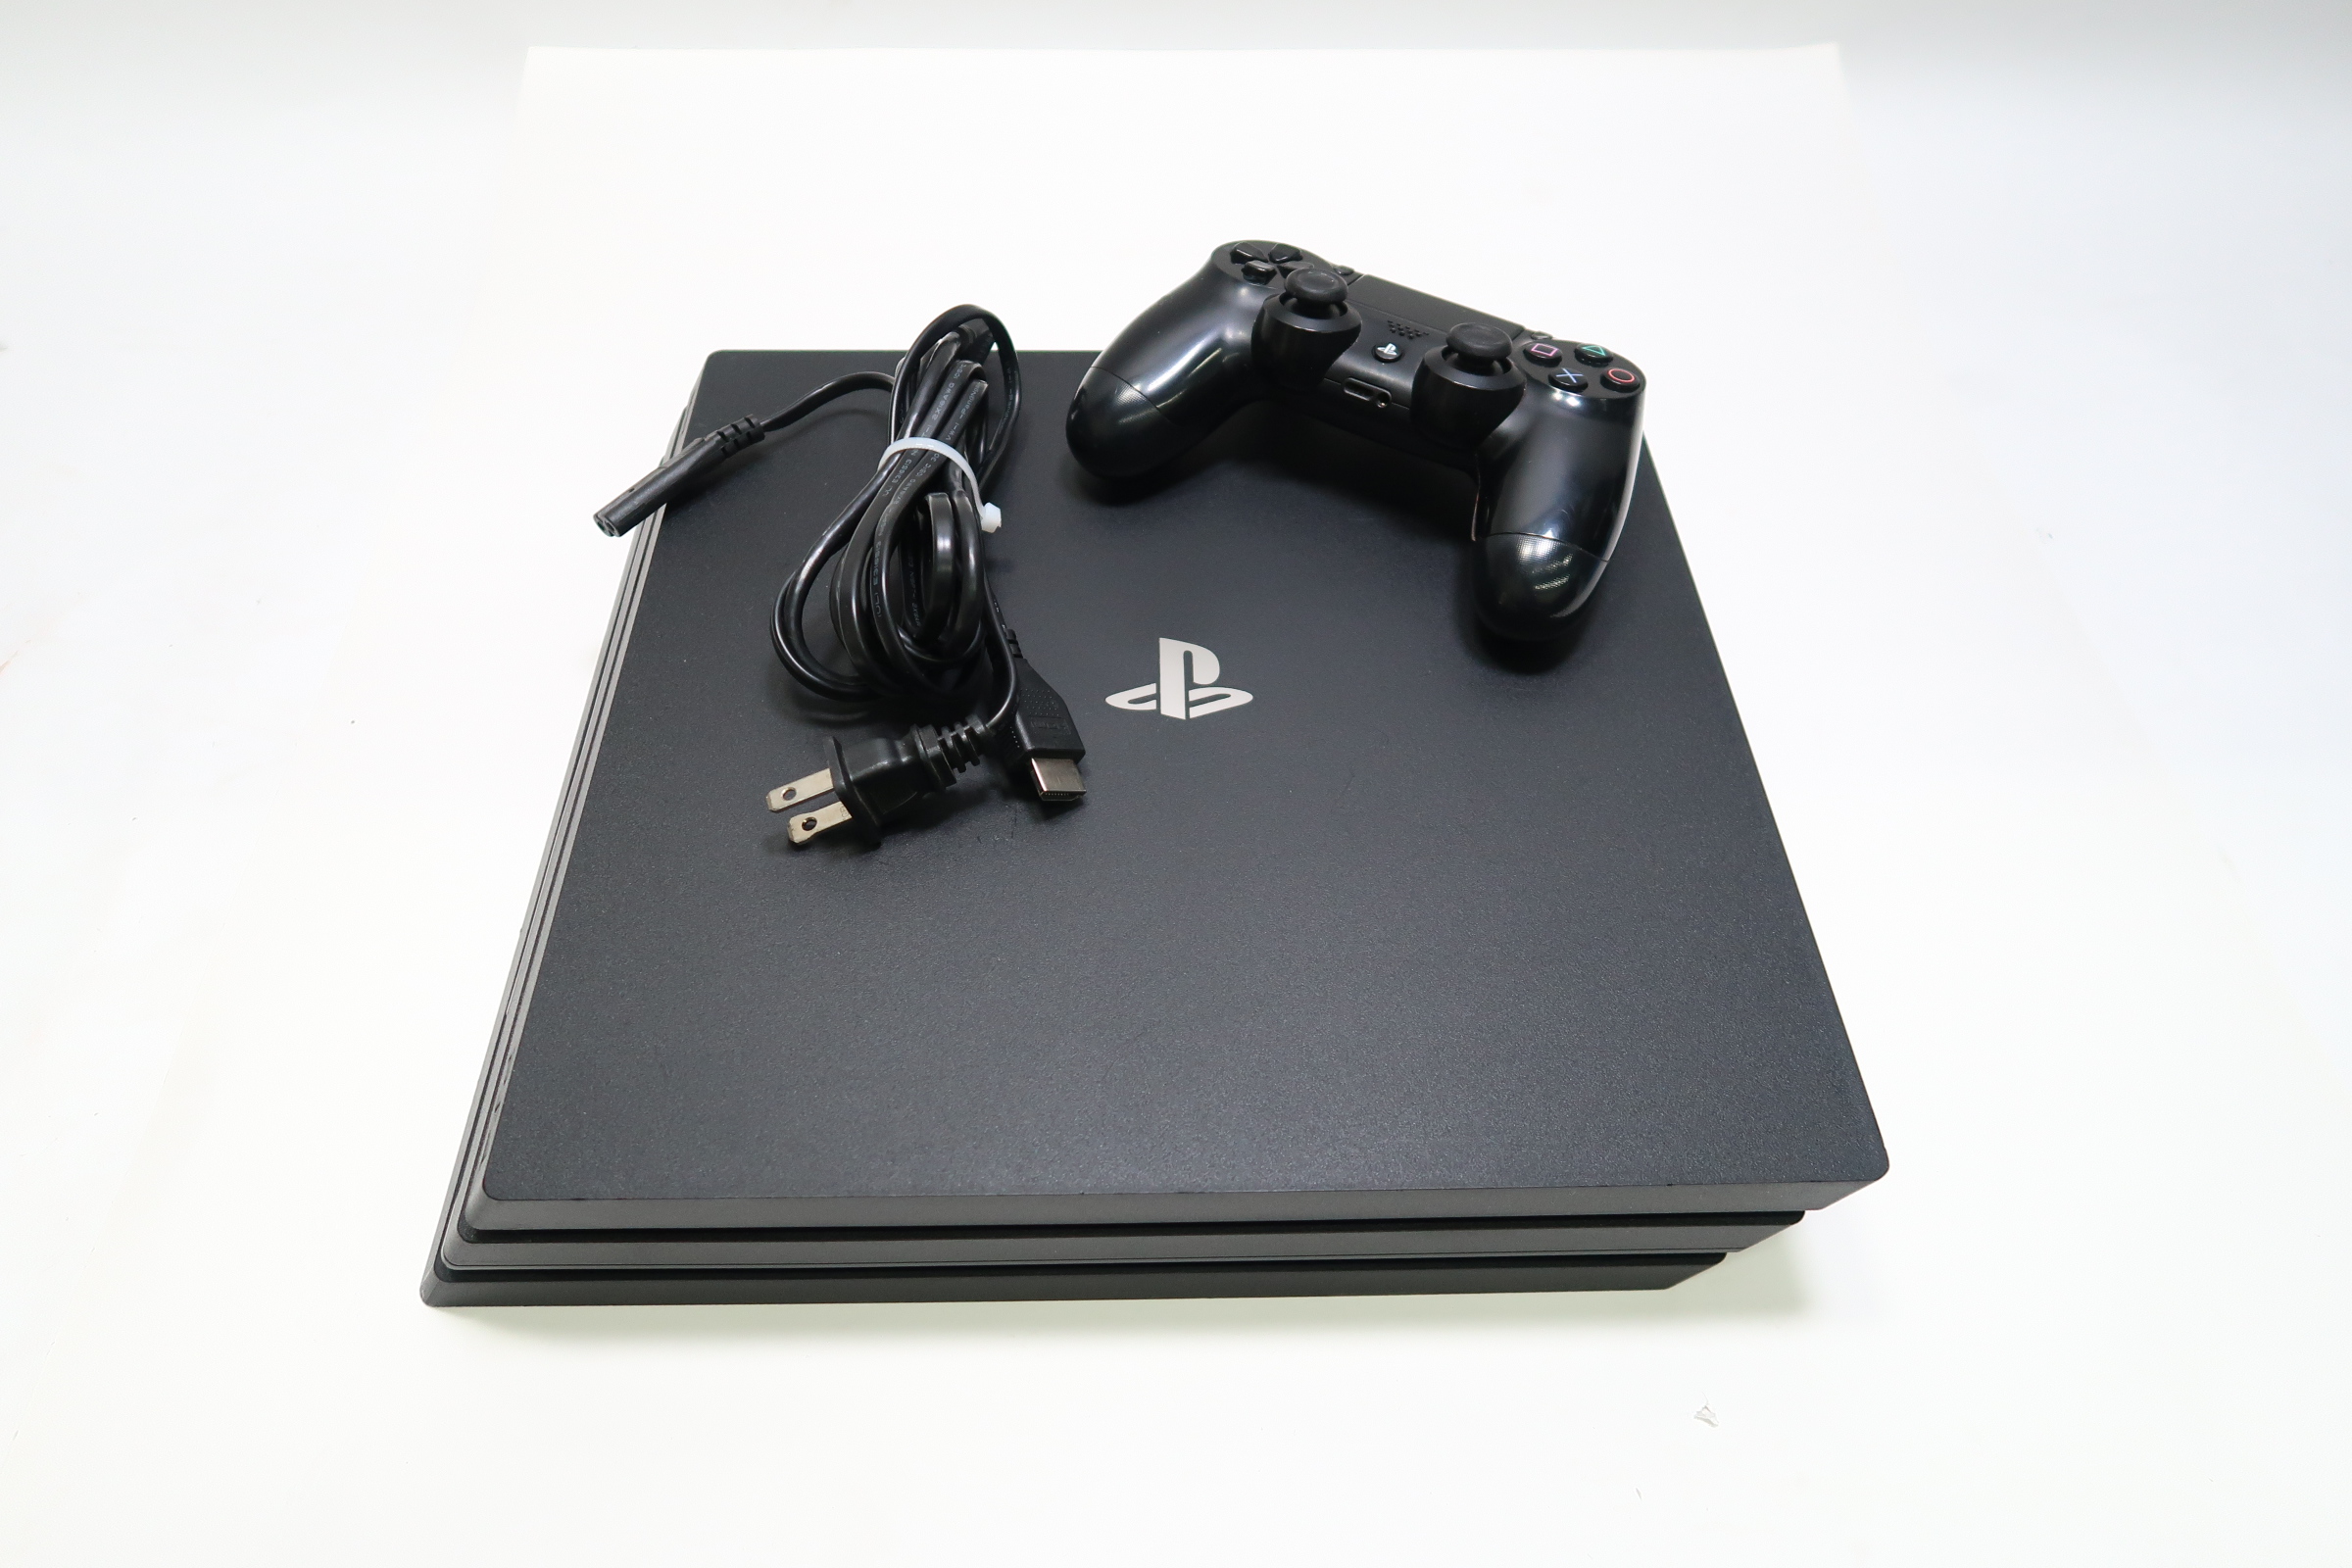 Sony Playstation 4 PS4 Slim 1TB CUH-2015B w/ Controller & Cables & Box  Tested